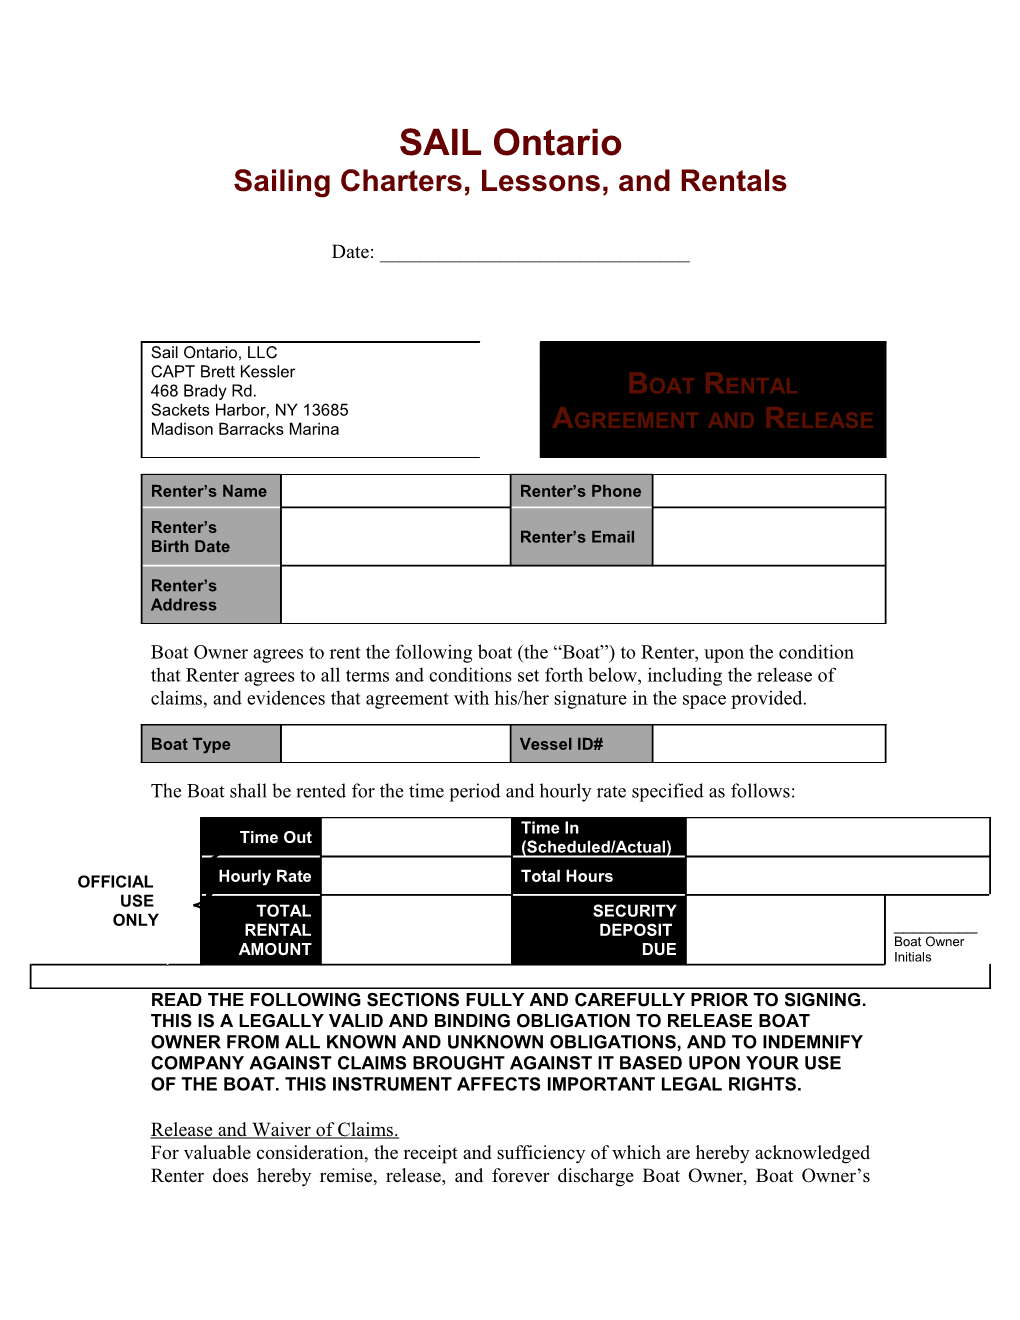 Sailing Charters, Lessons, and Rentals